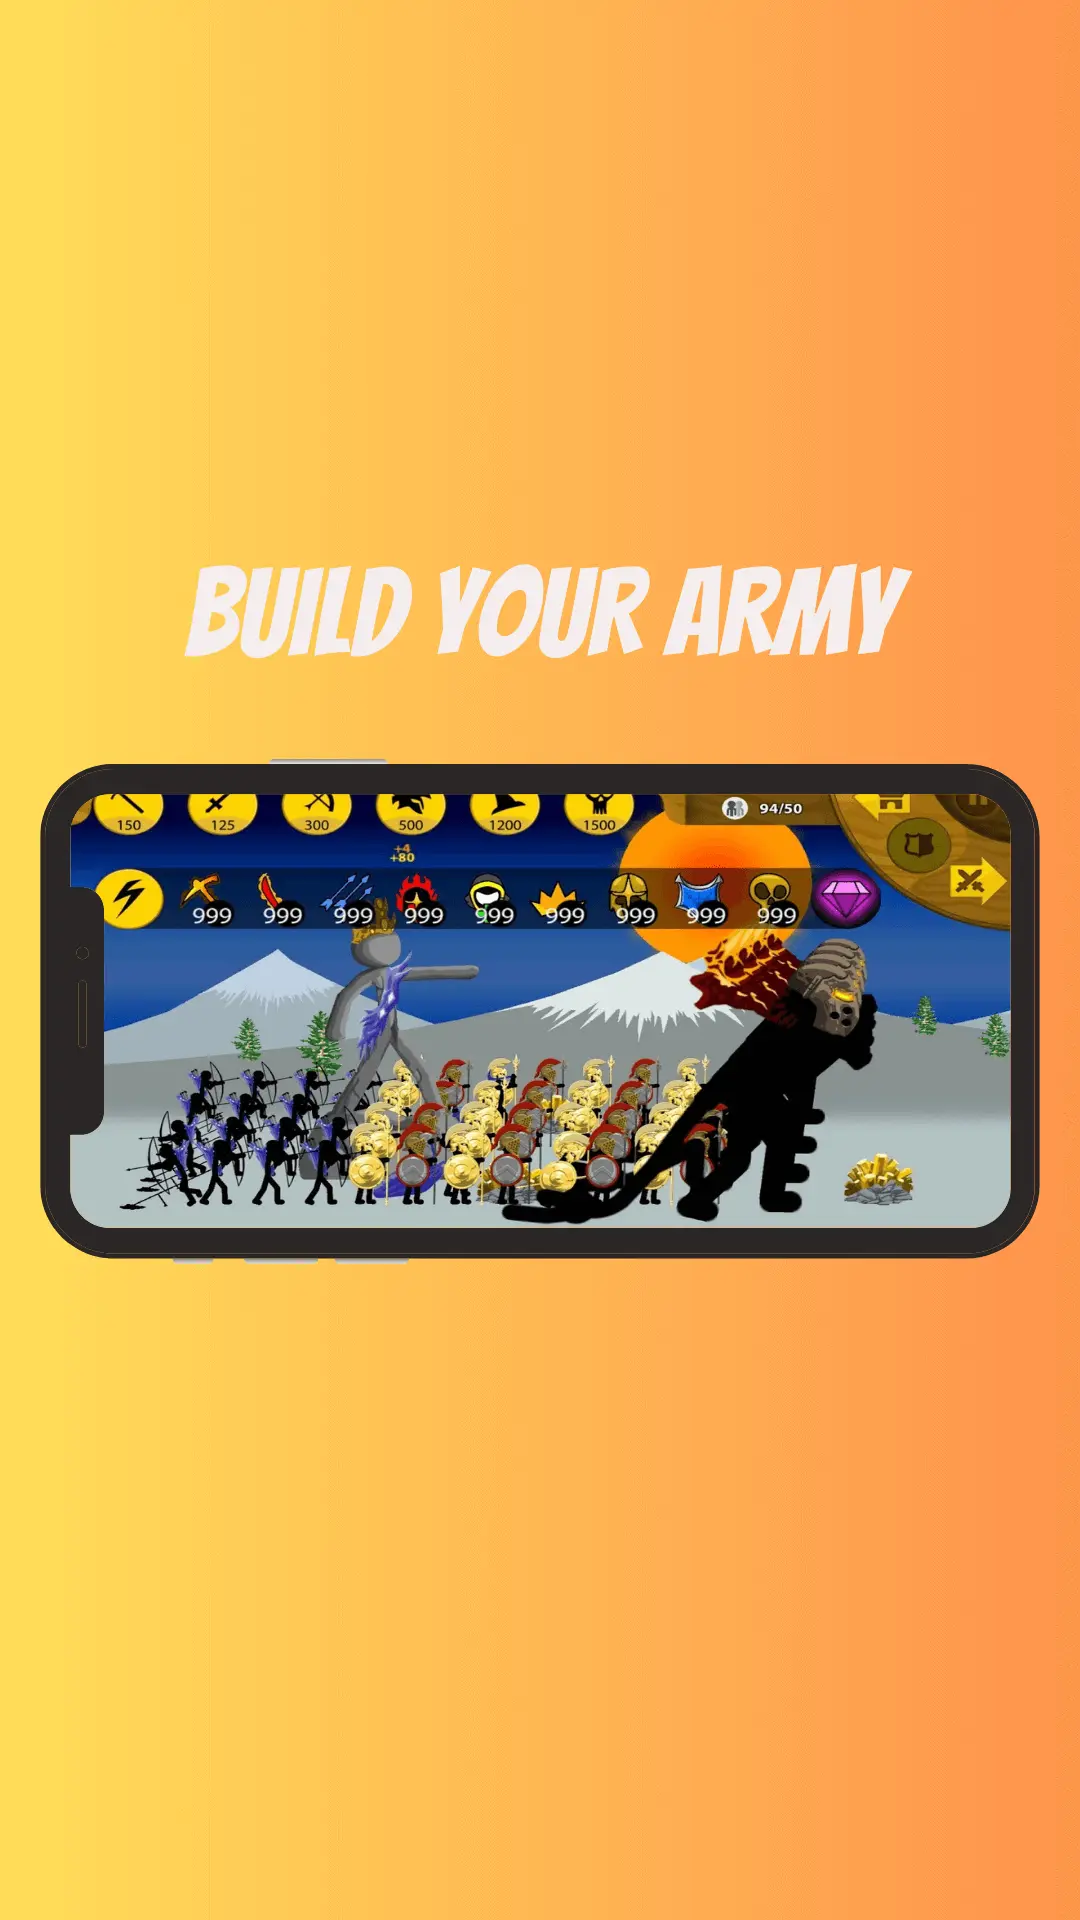 BUILD YOUR ARMY